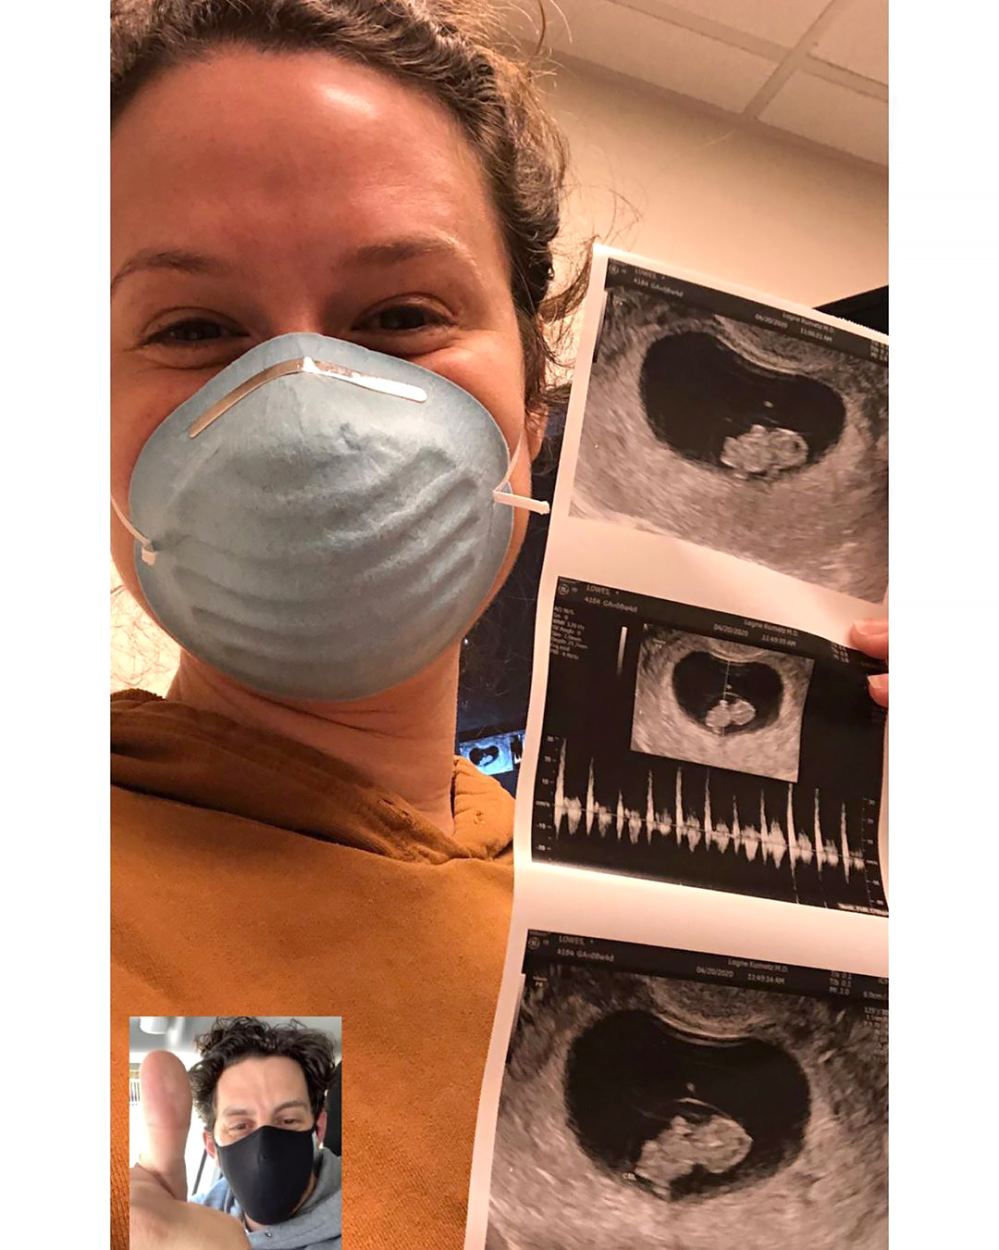 Katie Lowes Is Pregnant With Her and Husband Adam Shapiro's 2nd Child Following Previous Miscarriage